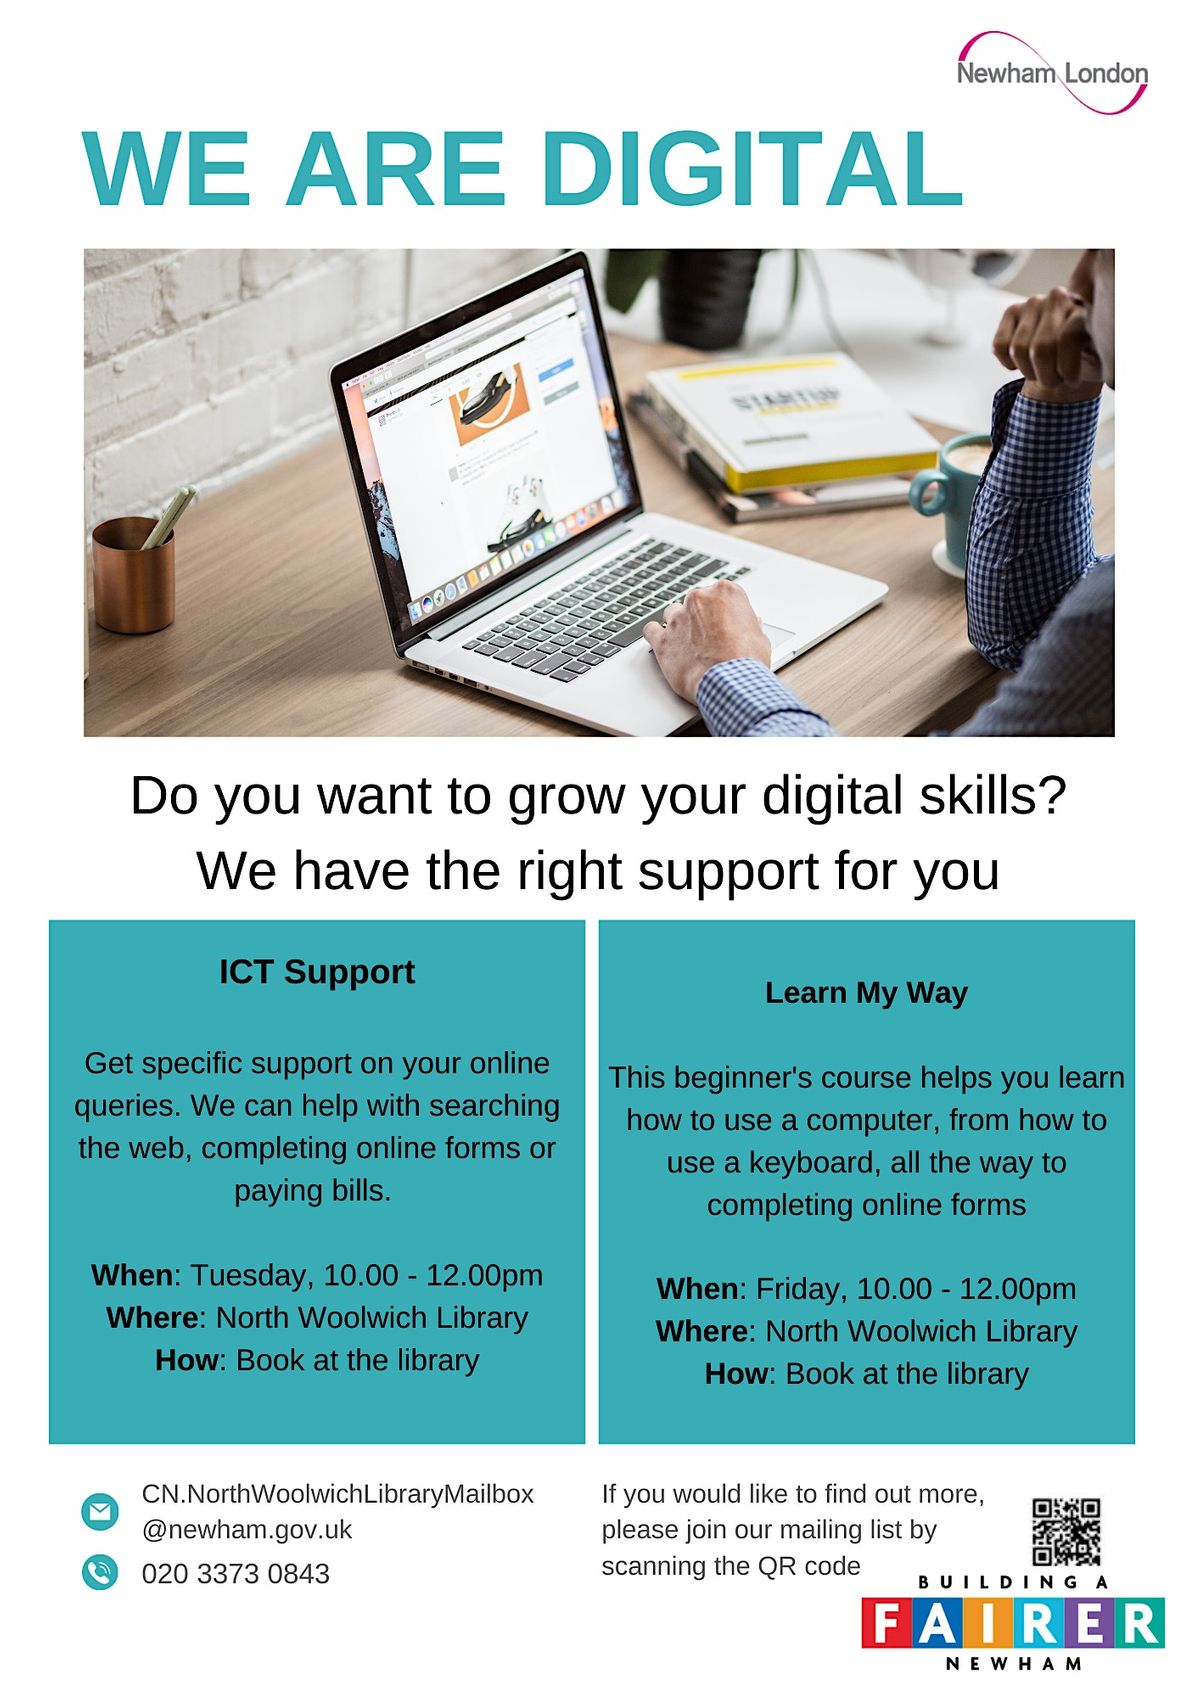 We are Digital: ICT Support at North Woolwich Library